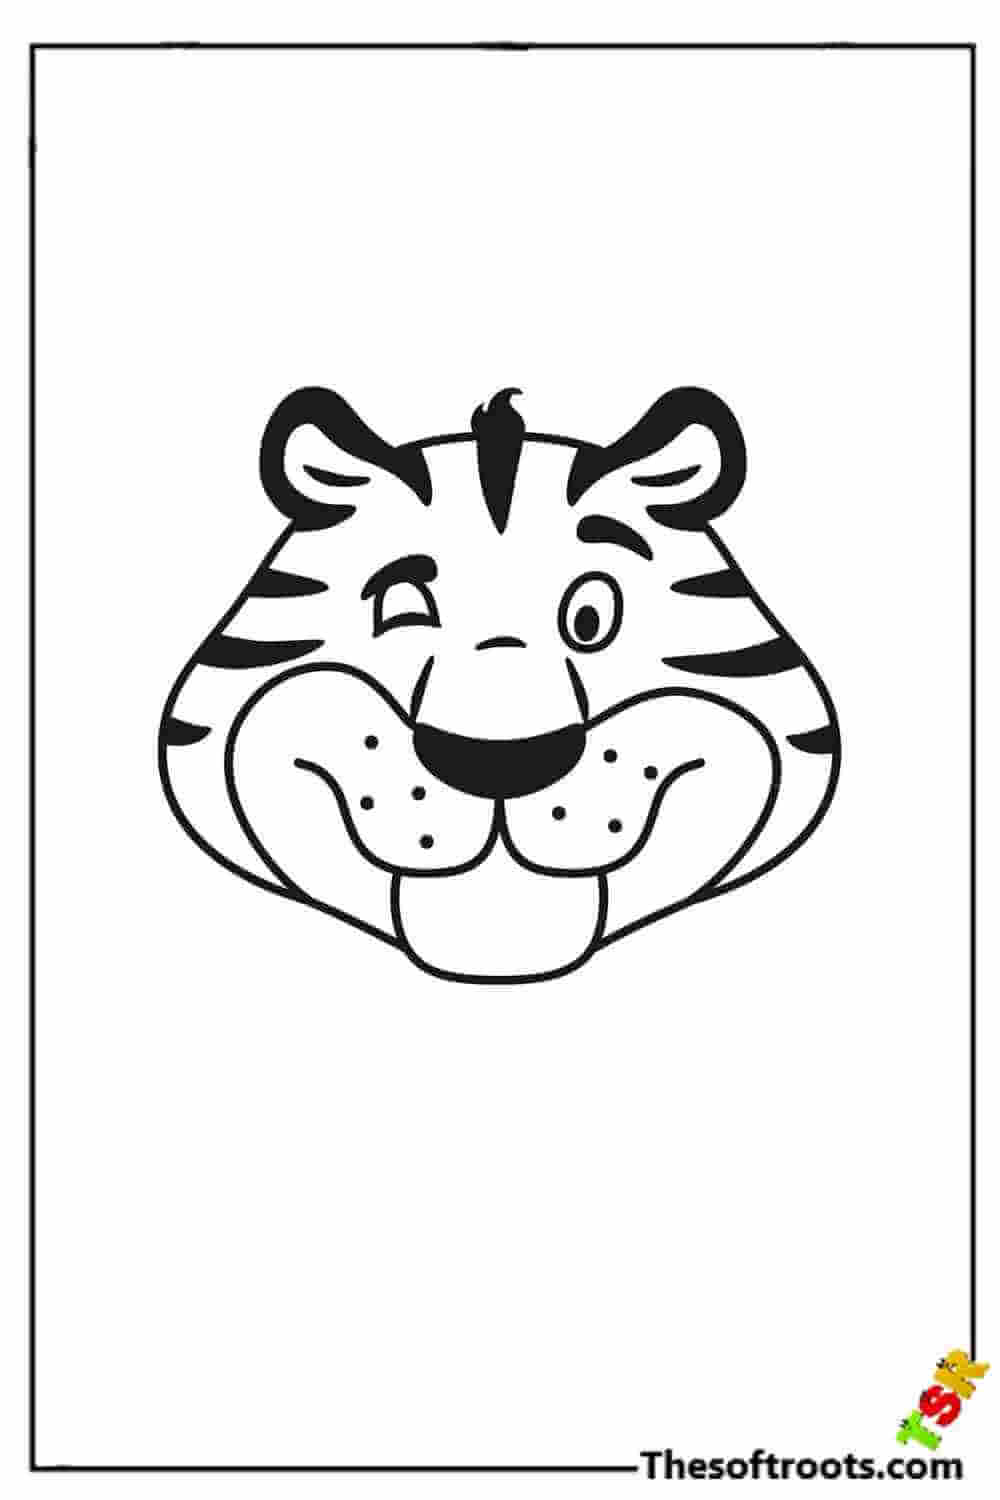 Tiger face coloring pages